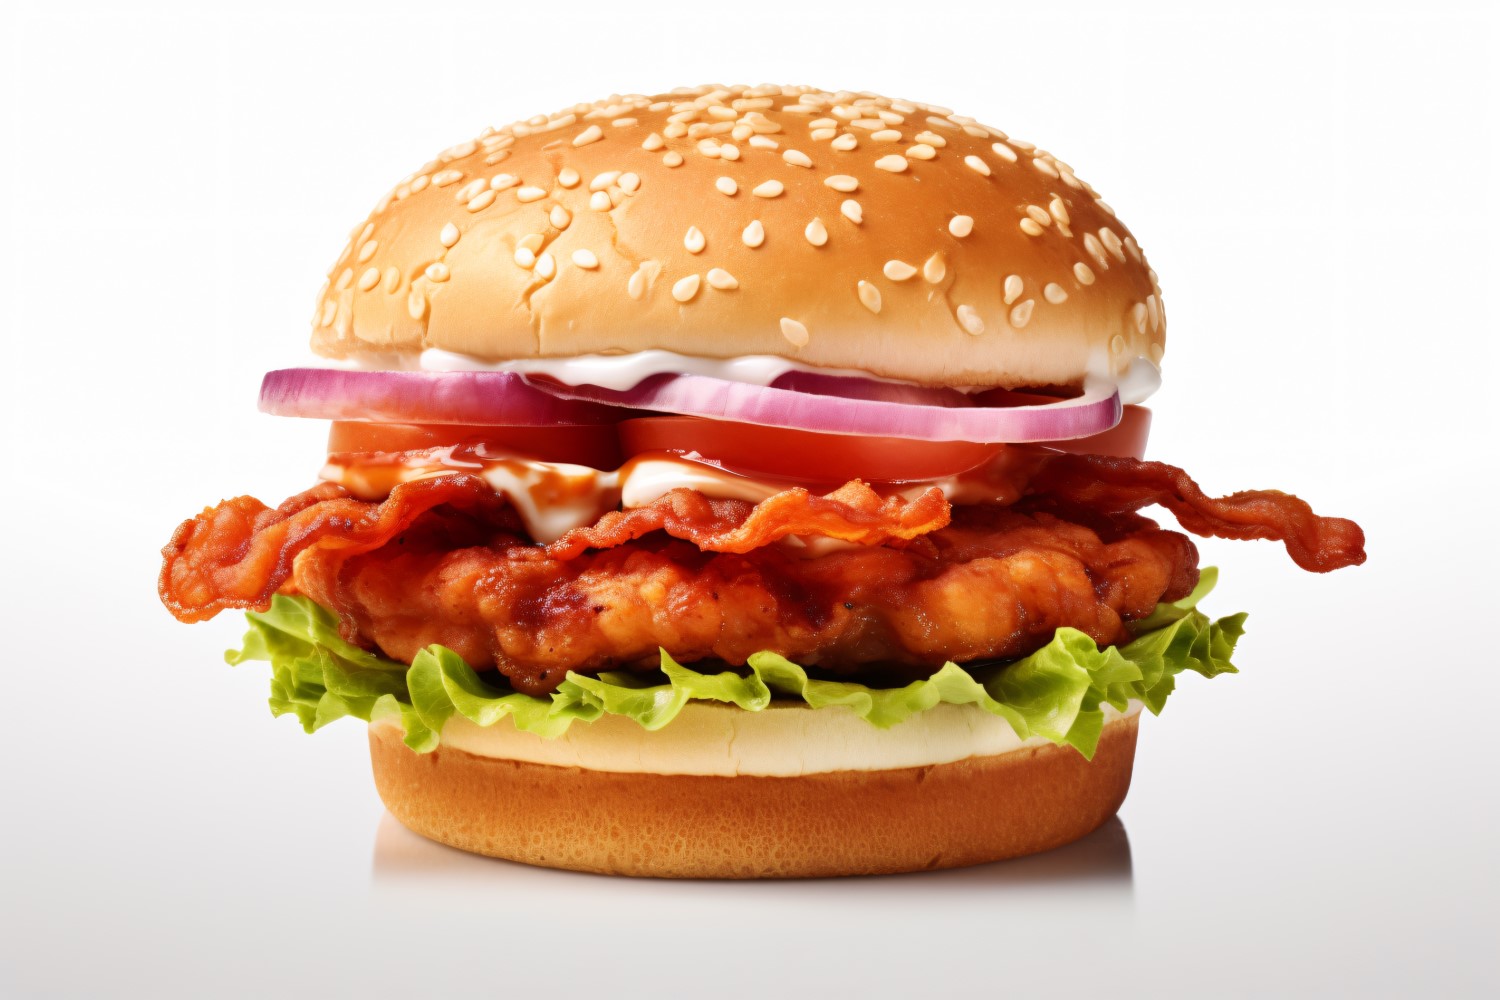 Crunchy Chicken and Fish Burger, on white background 39